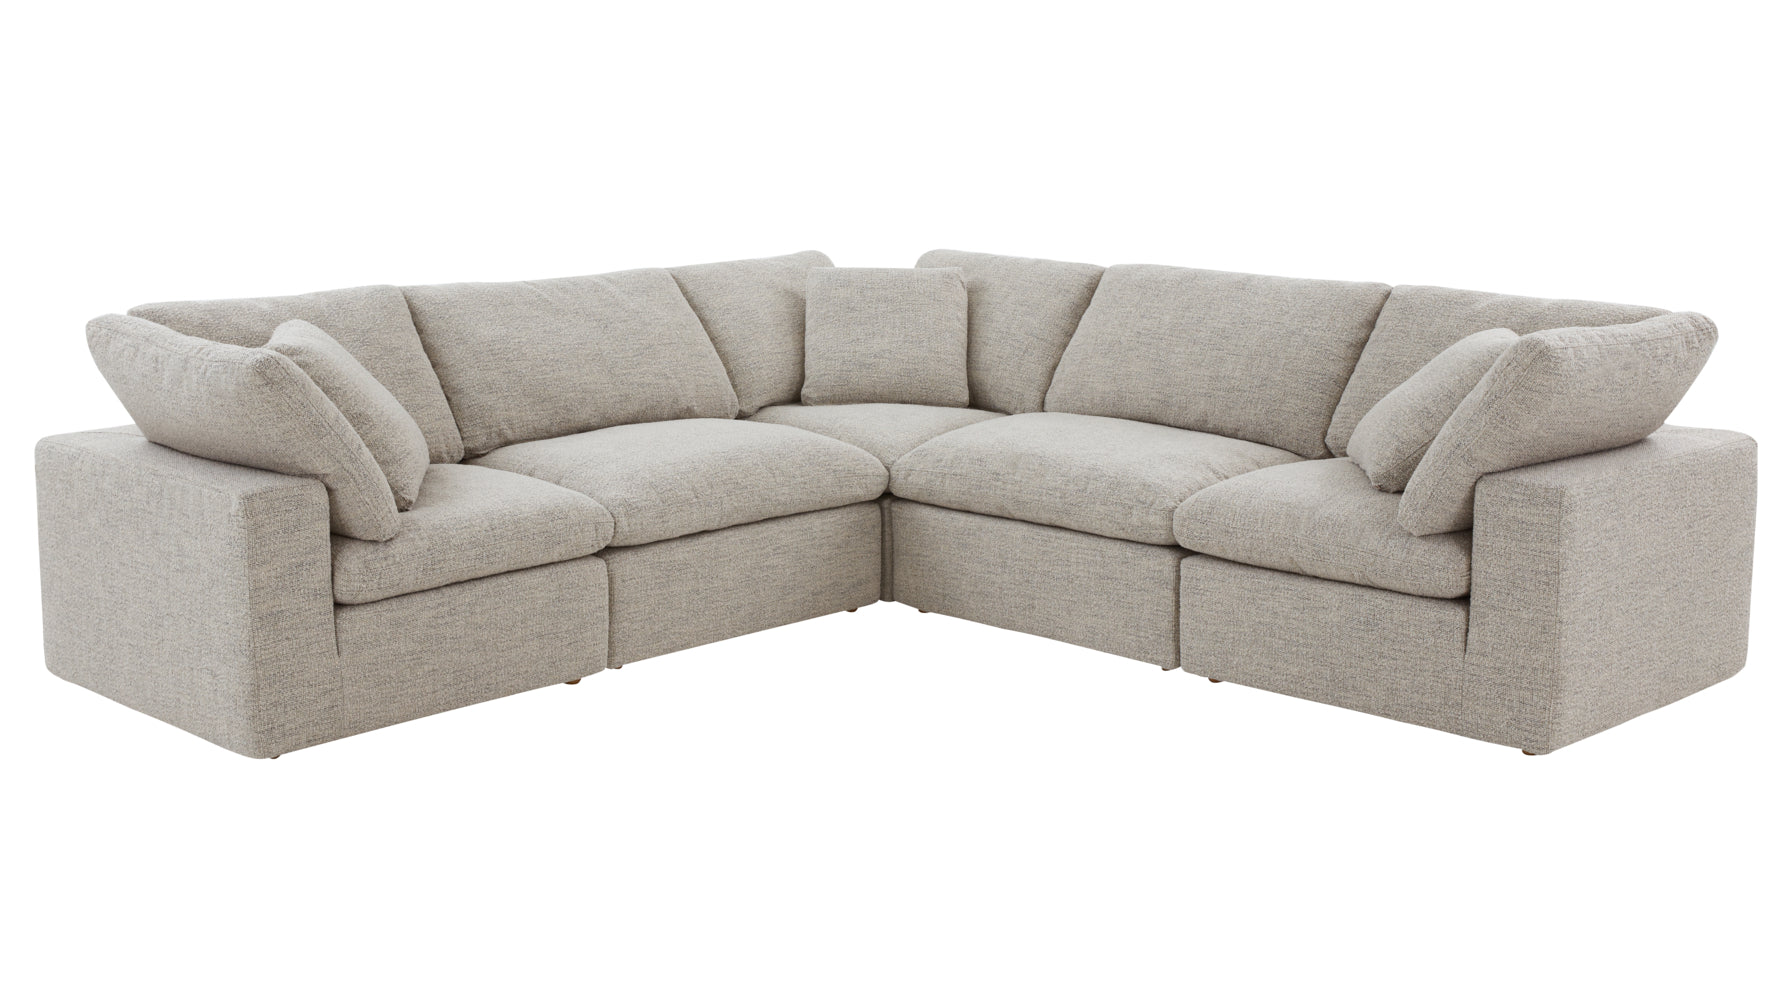 Movie Night™ 5-Piece Modular Sectional Closed, Standard, Oatmeal - Image 4